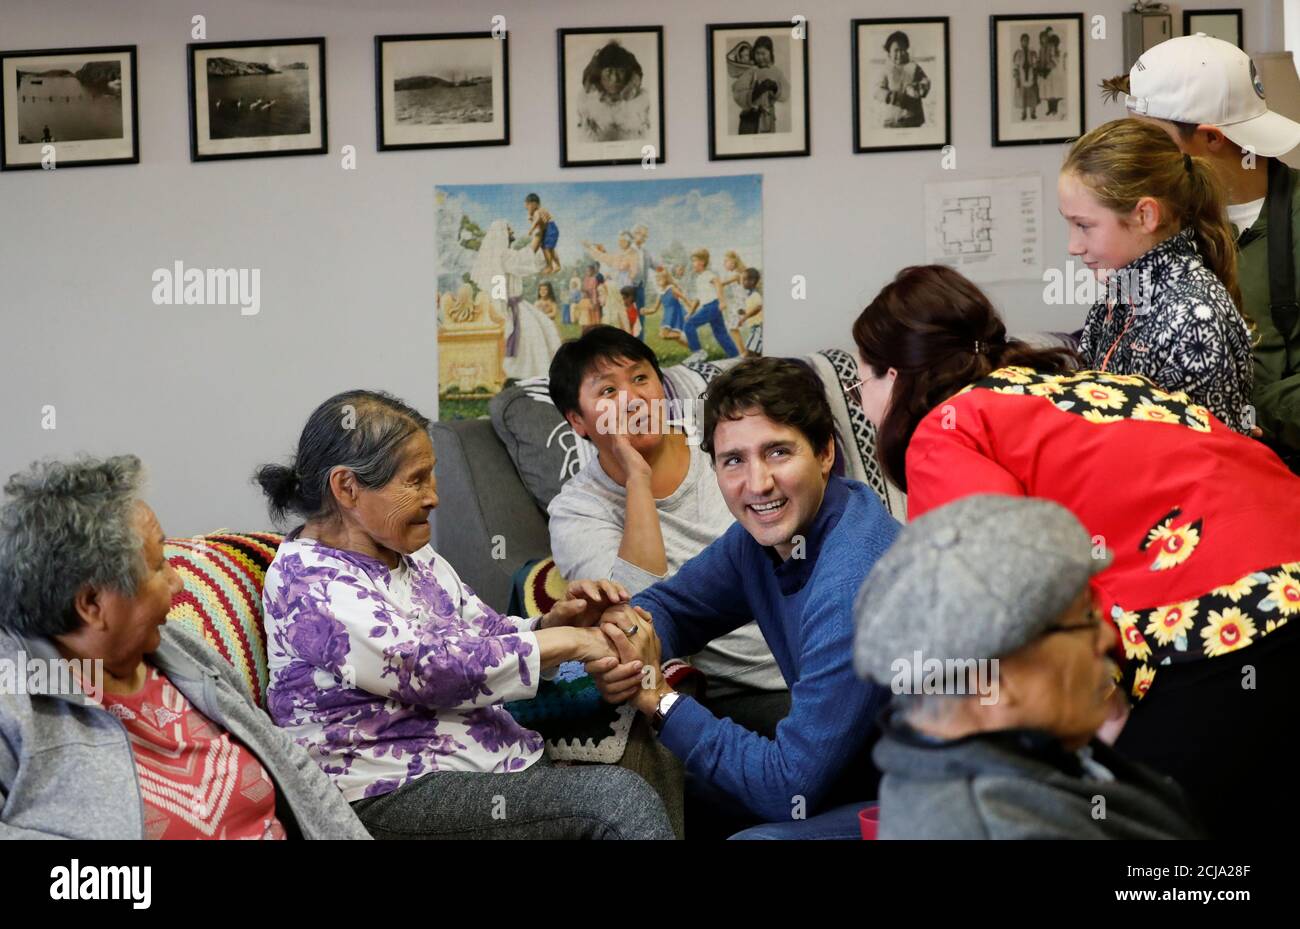 Liberal leader and Canadian Prime Minister Justin Trudeau, accompanied by his kids Ella-Grace Margaret and Xavier James and by Nunavut's Liberal candidate Megan Pizzo-Lyall, meets with elders during an election campaign visit to Iqaluit, Nunavut, Canada October 8, 2019. REUTERS/Stephane Mahe Stock Photo